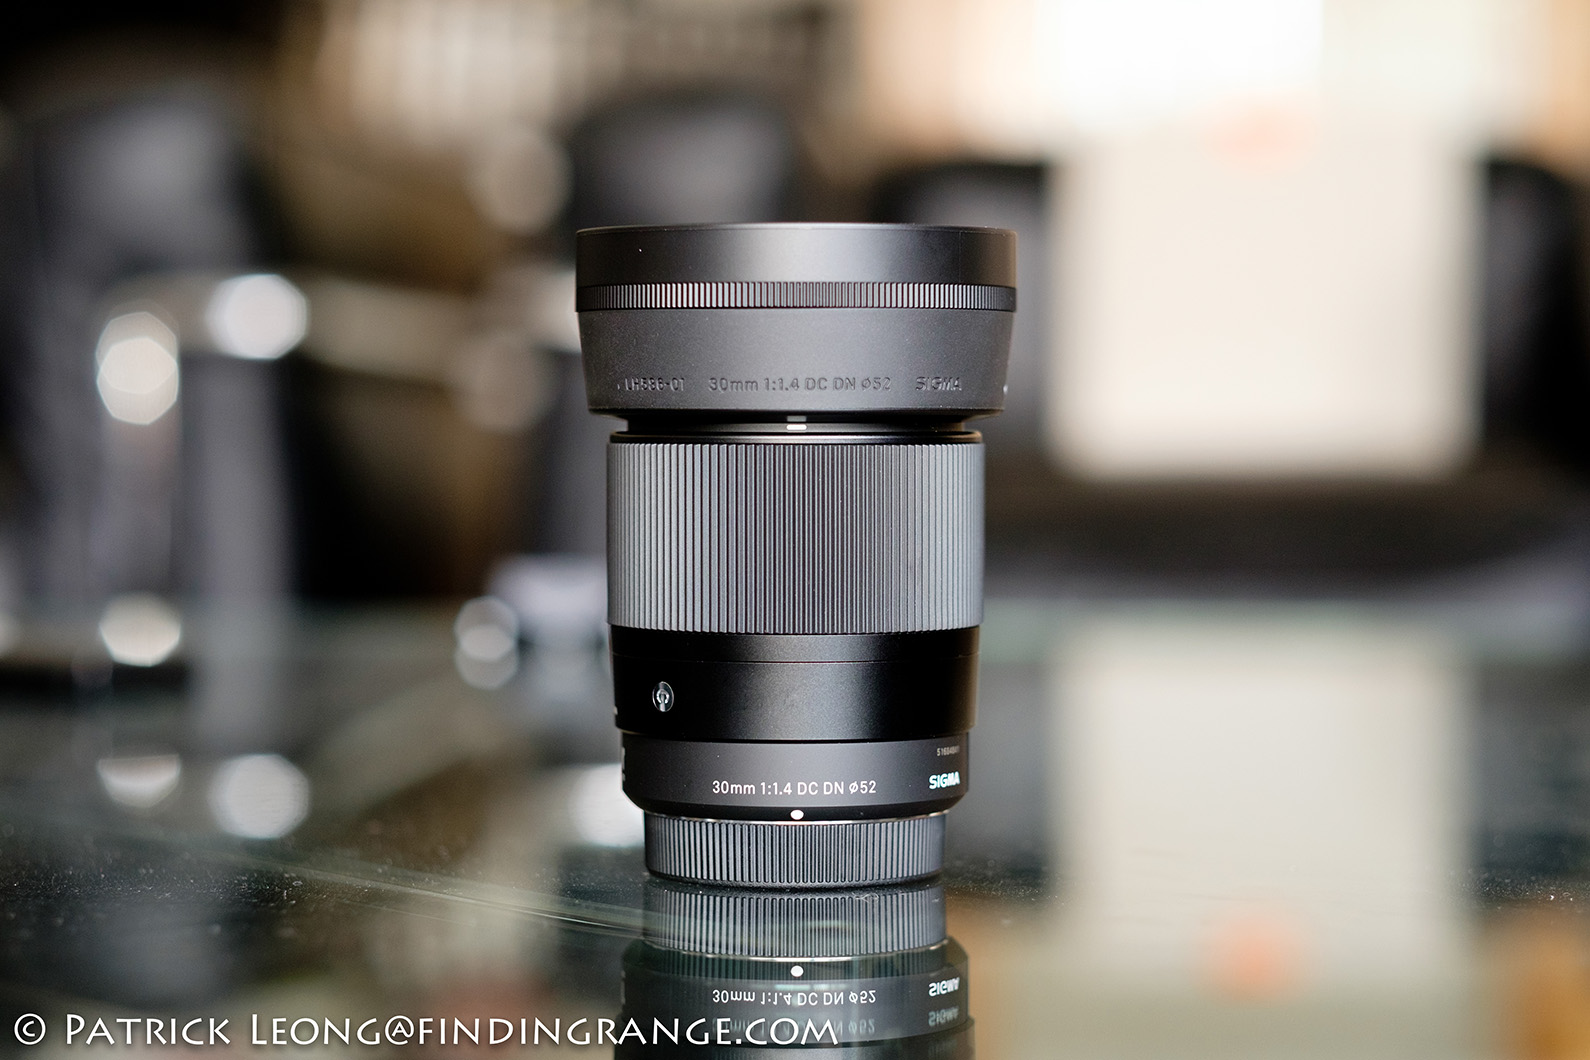 Sigma 30mm f1.4 DC DN Contemporary Review For M43